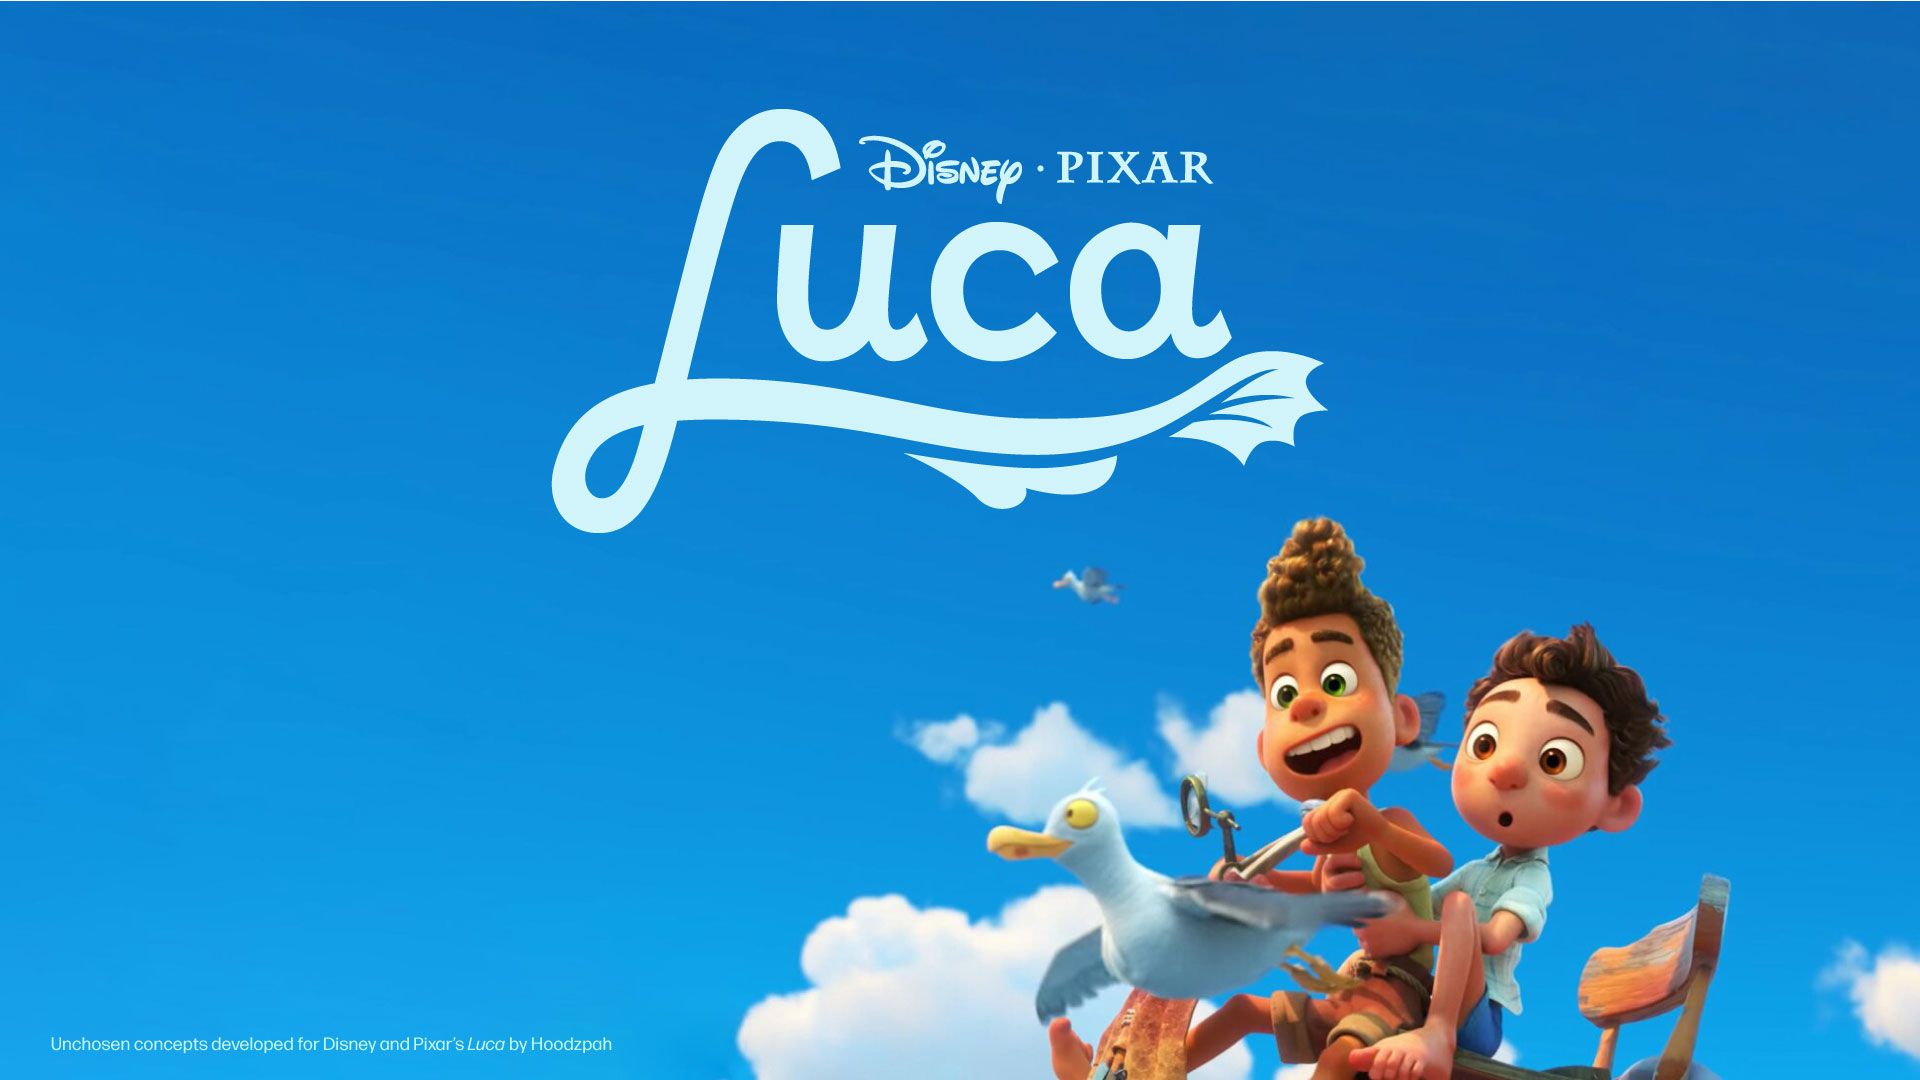 Title Treatment Concepts for Disney and Pixar's Luca % %